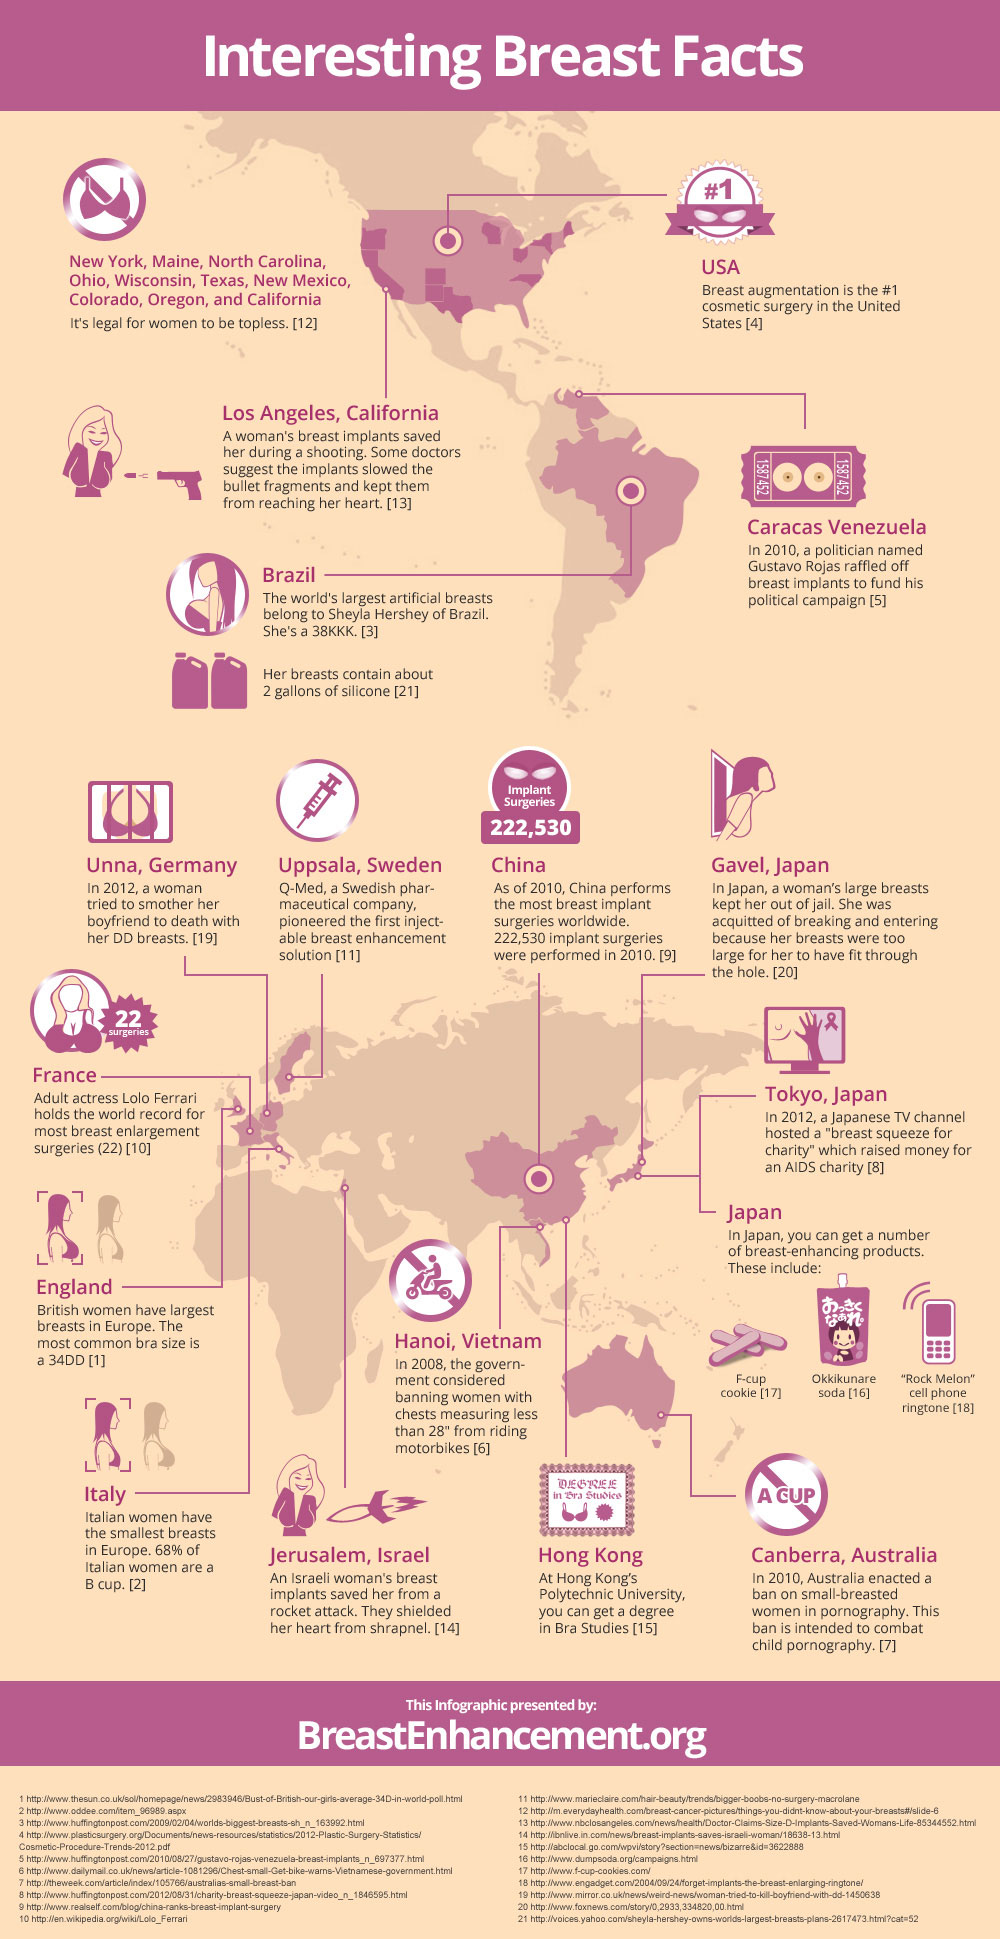 This is an Infographic for Fun Breast Facts Around the World!